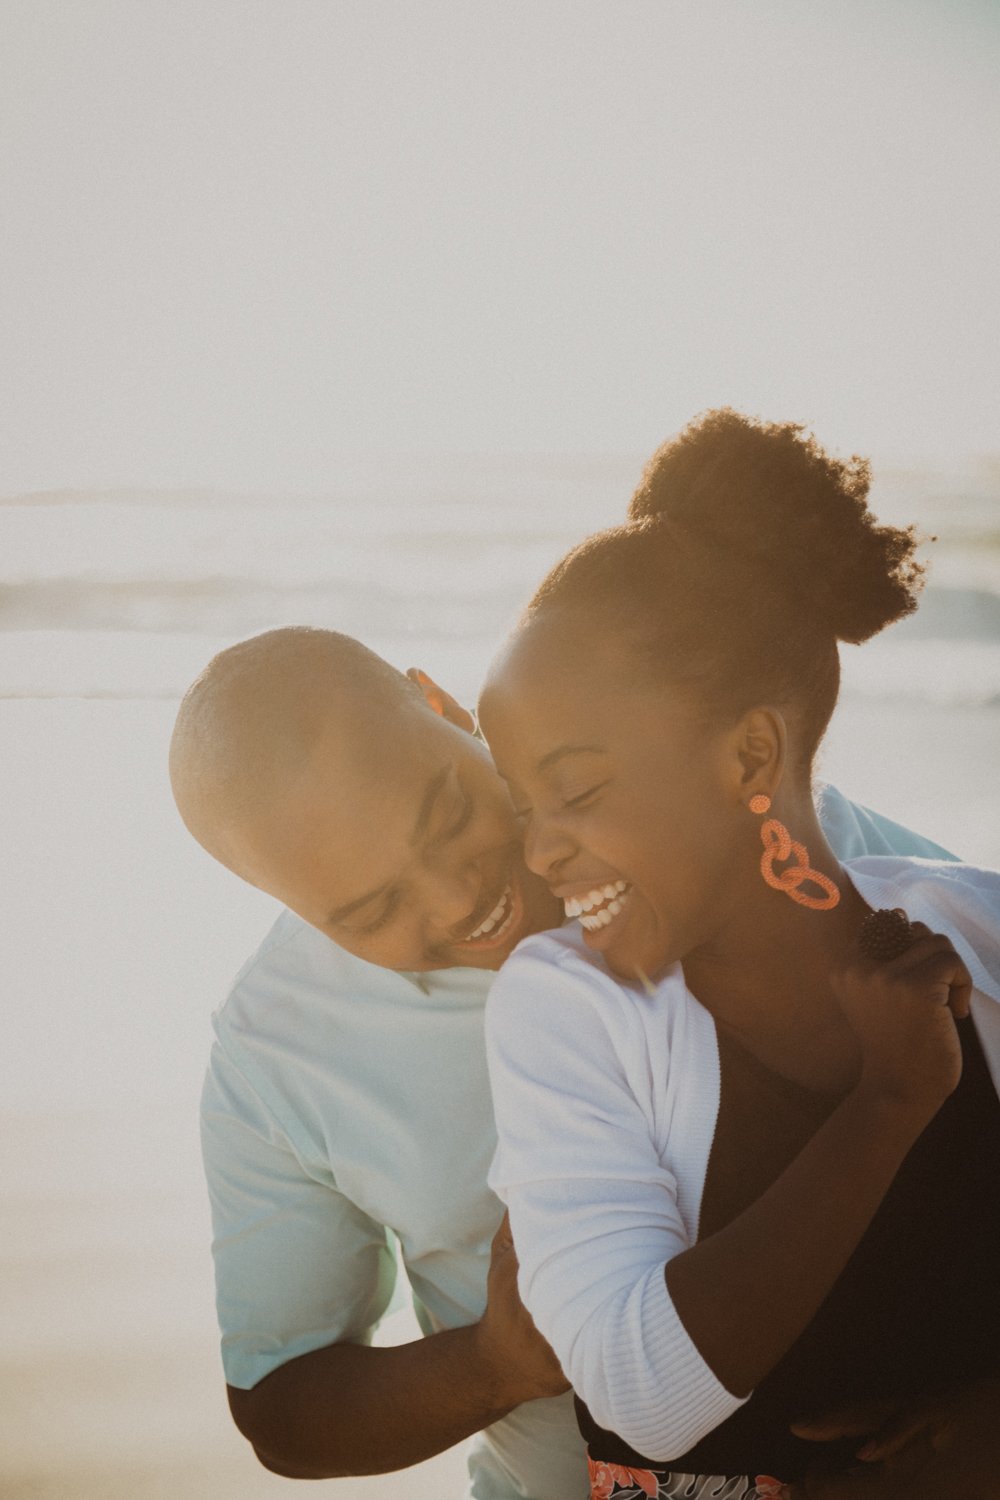 Susnet Beach Engagement Photoshoot in Cape Town - Bianca Asher Photography-9.jpg